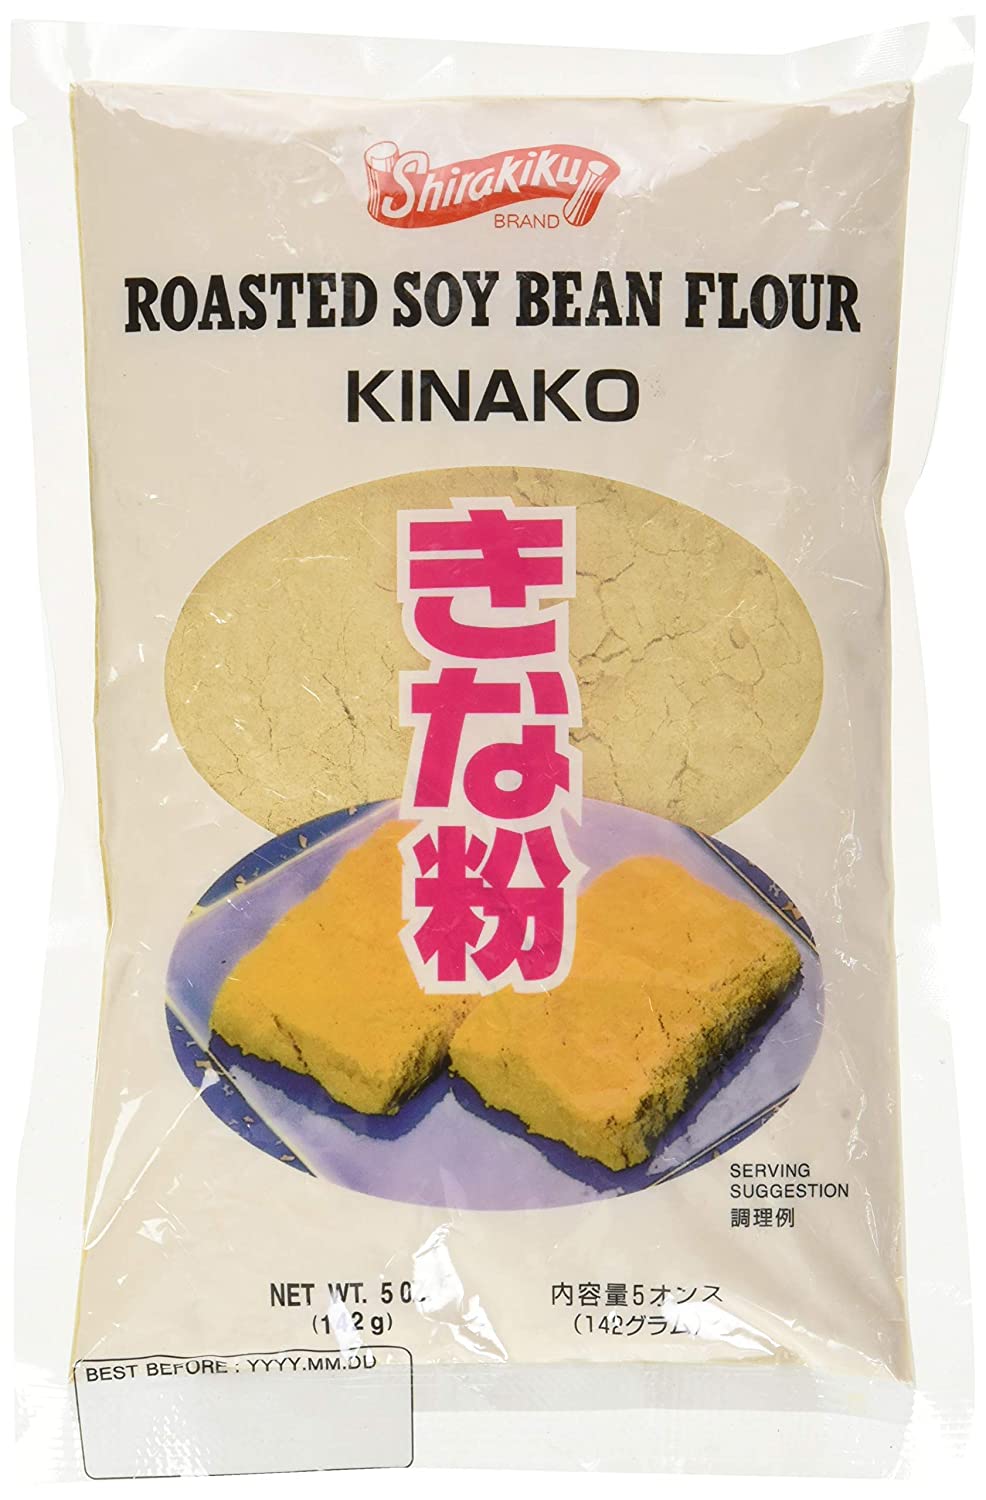 Soy flour as a substitute for all-purpose flour